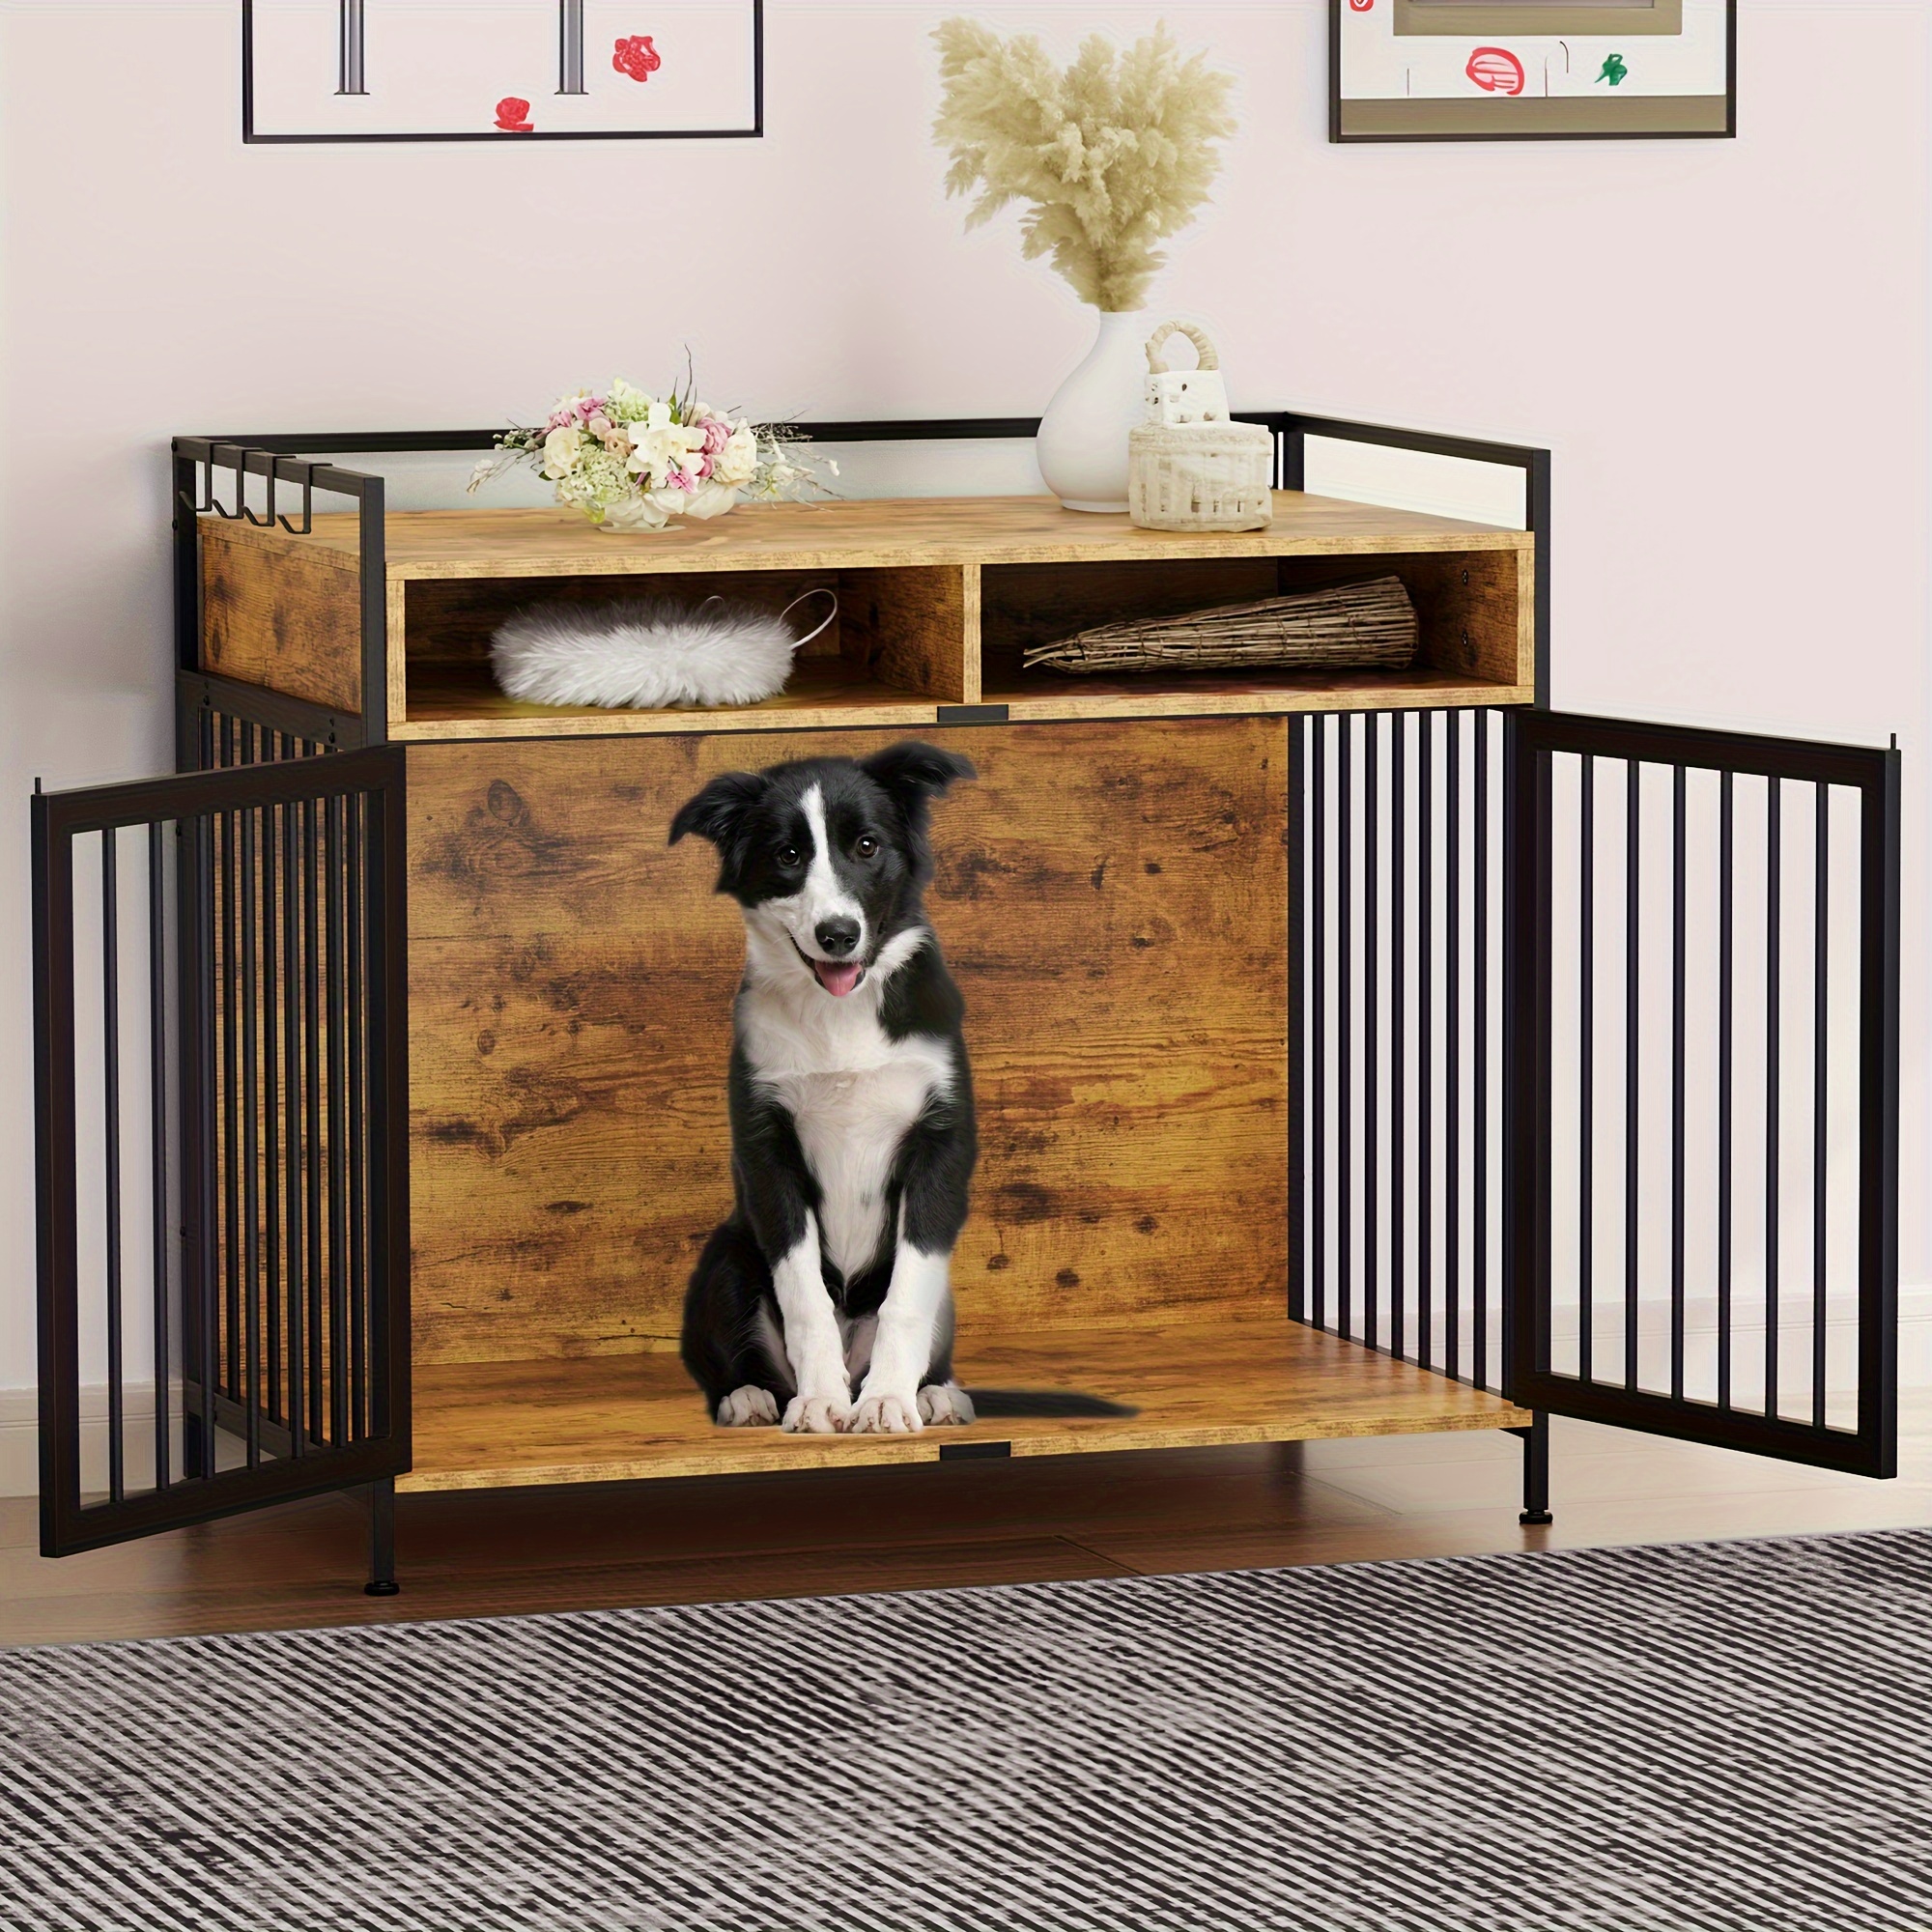 

Dwvo Large Dog Crate, 41" Heavy Duty Dog Kennel With 2 Drawers End Table, Wooden Dog Cage Indoor Dog House Pet Crate Table With Double Doors For Large Medium Small Dogs